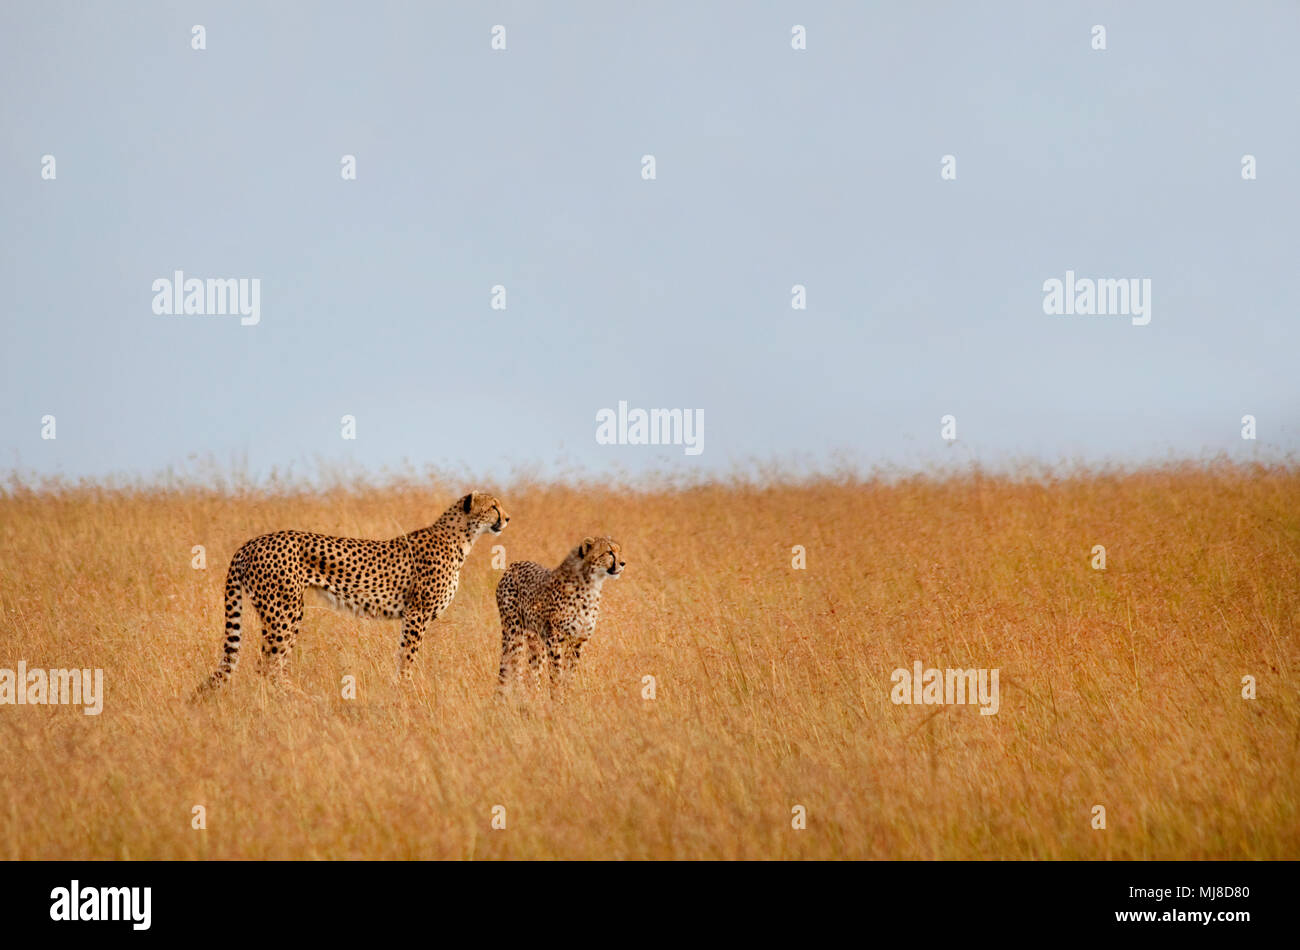 Two cheetahs standing in the African Savanna. Stock Photo